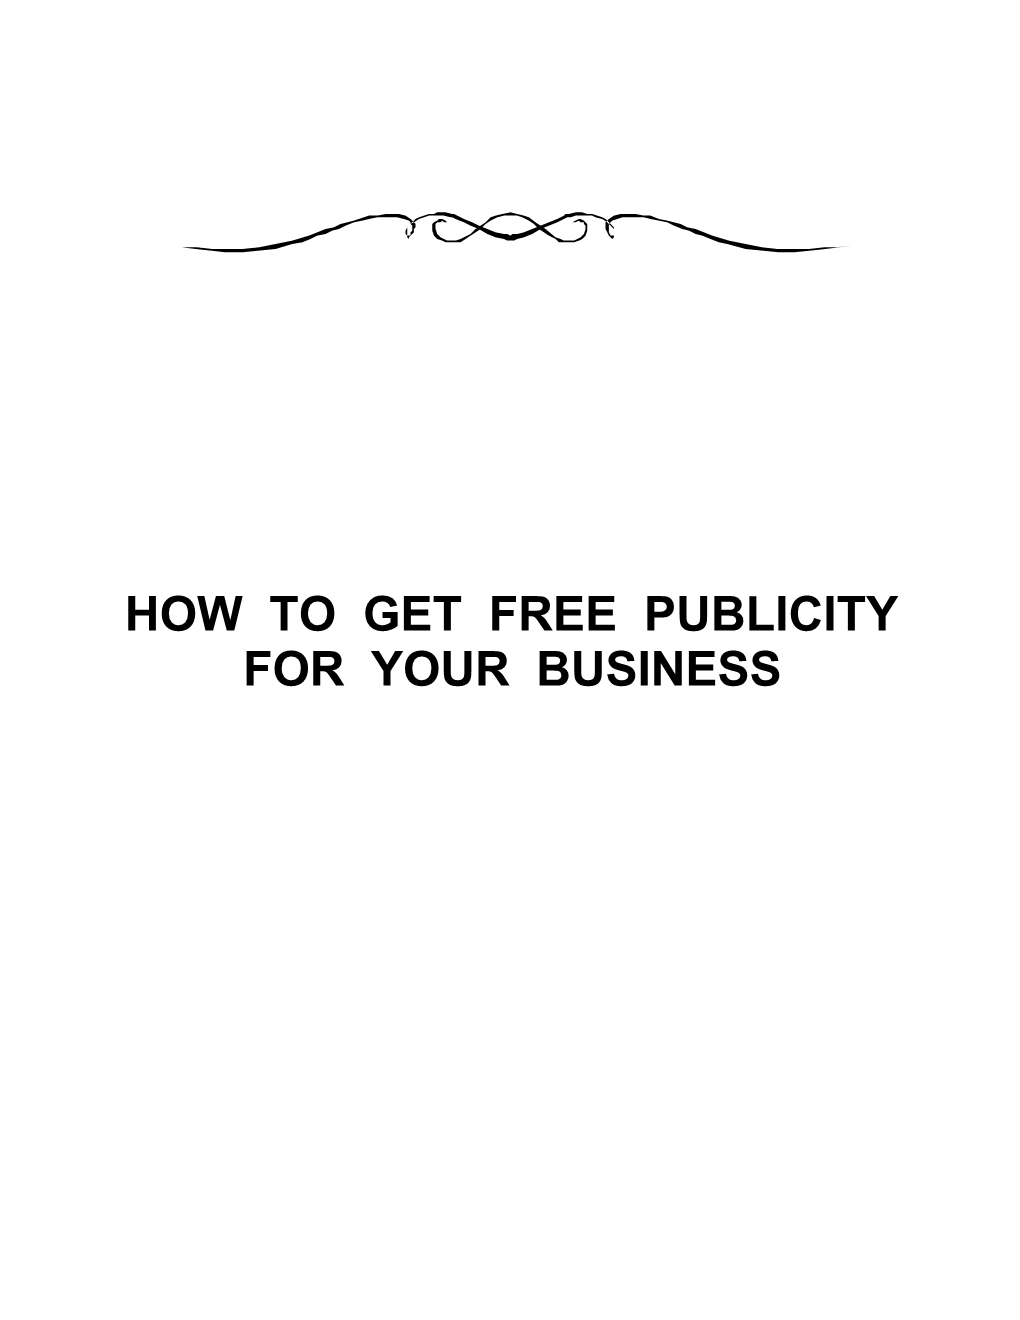 How to Get Free Publicity for Your Business